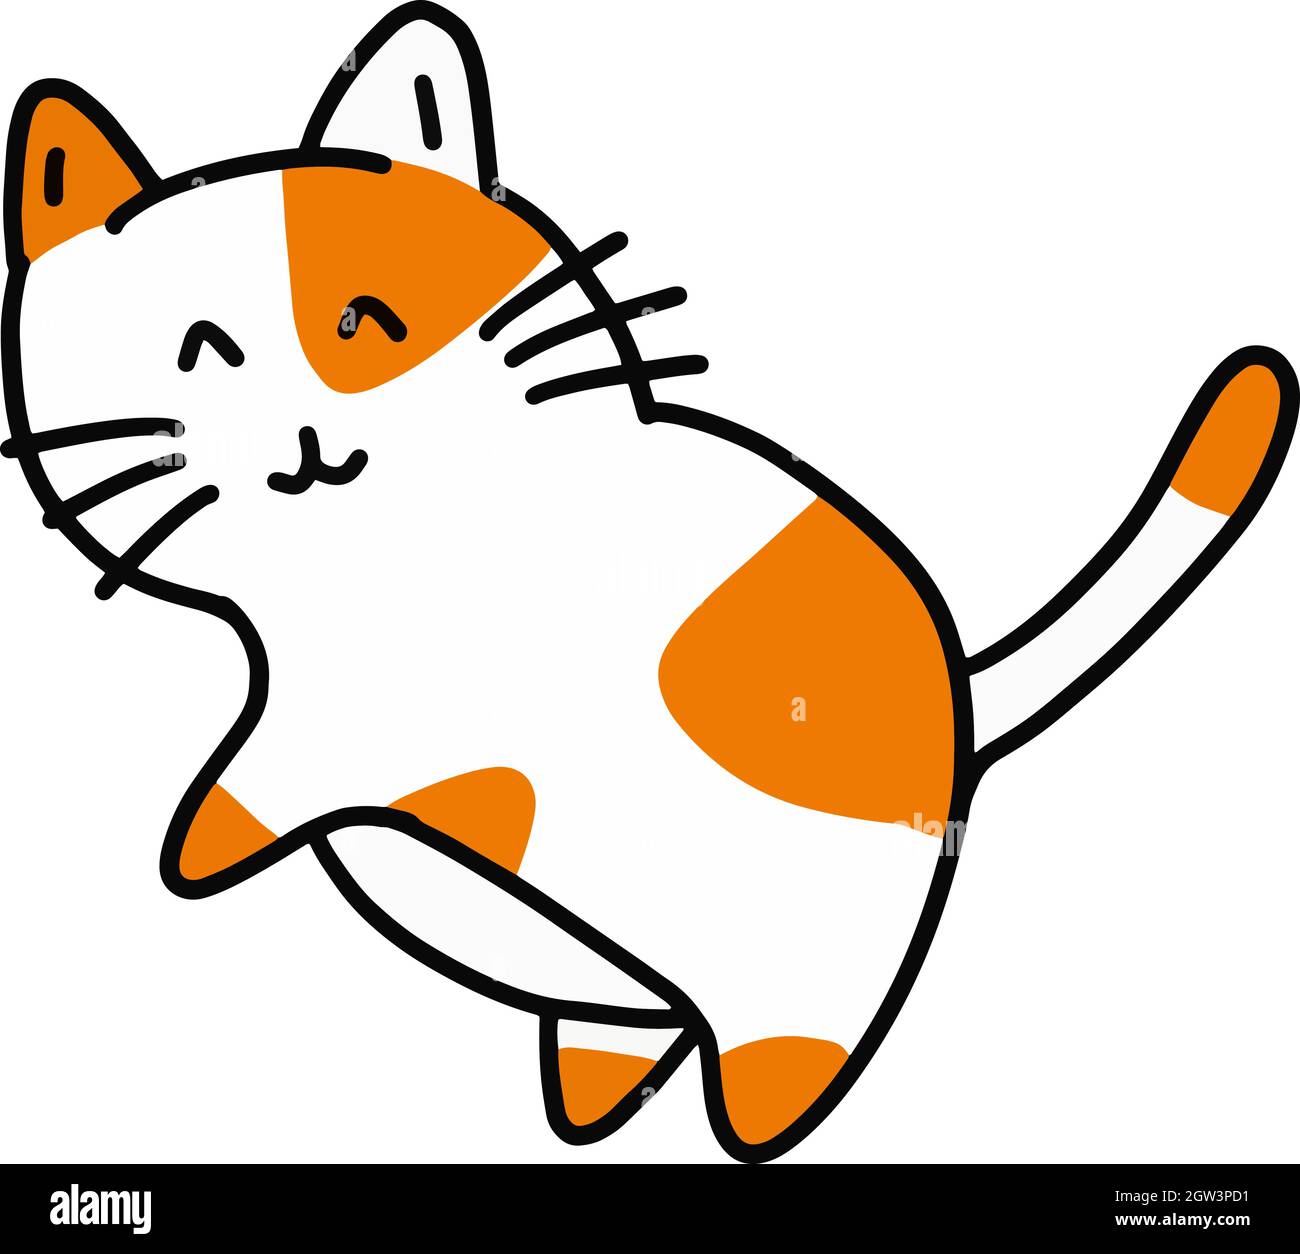 Hand drawing as white and orange cat shape in cartoon design on white background stock vector image art